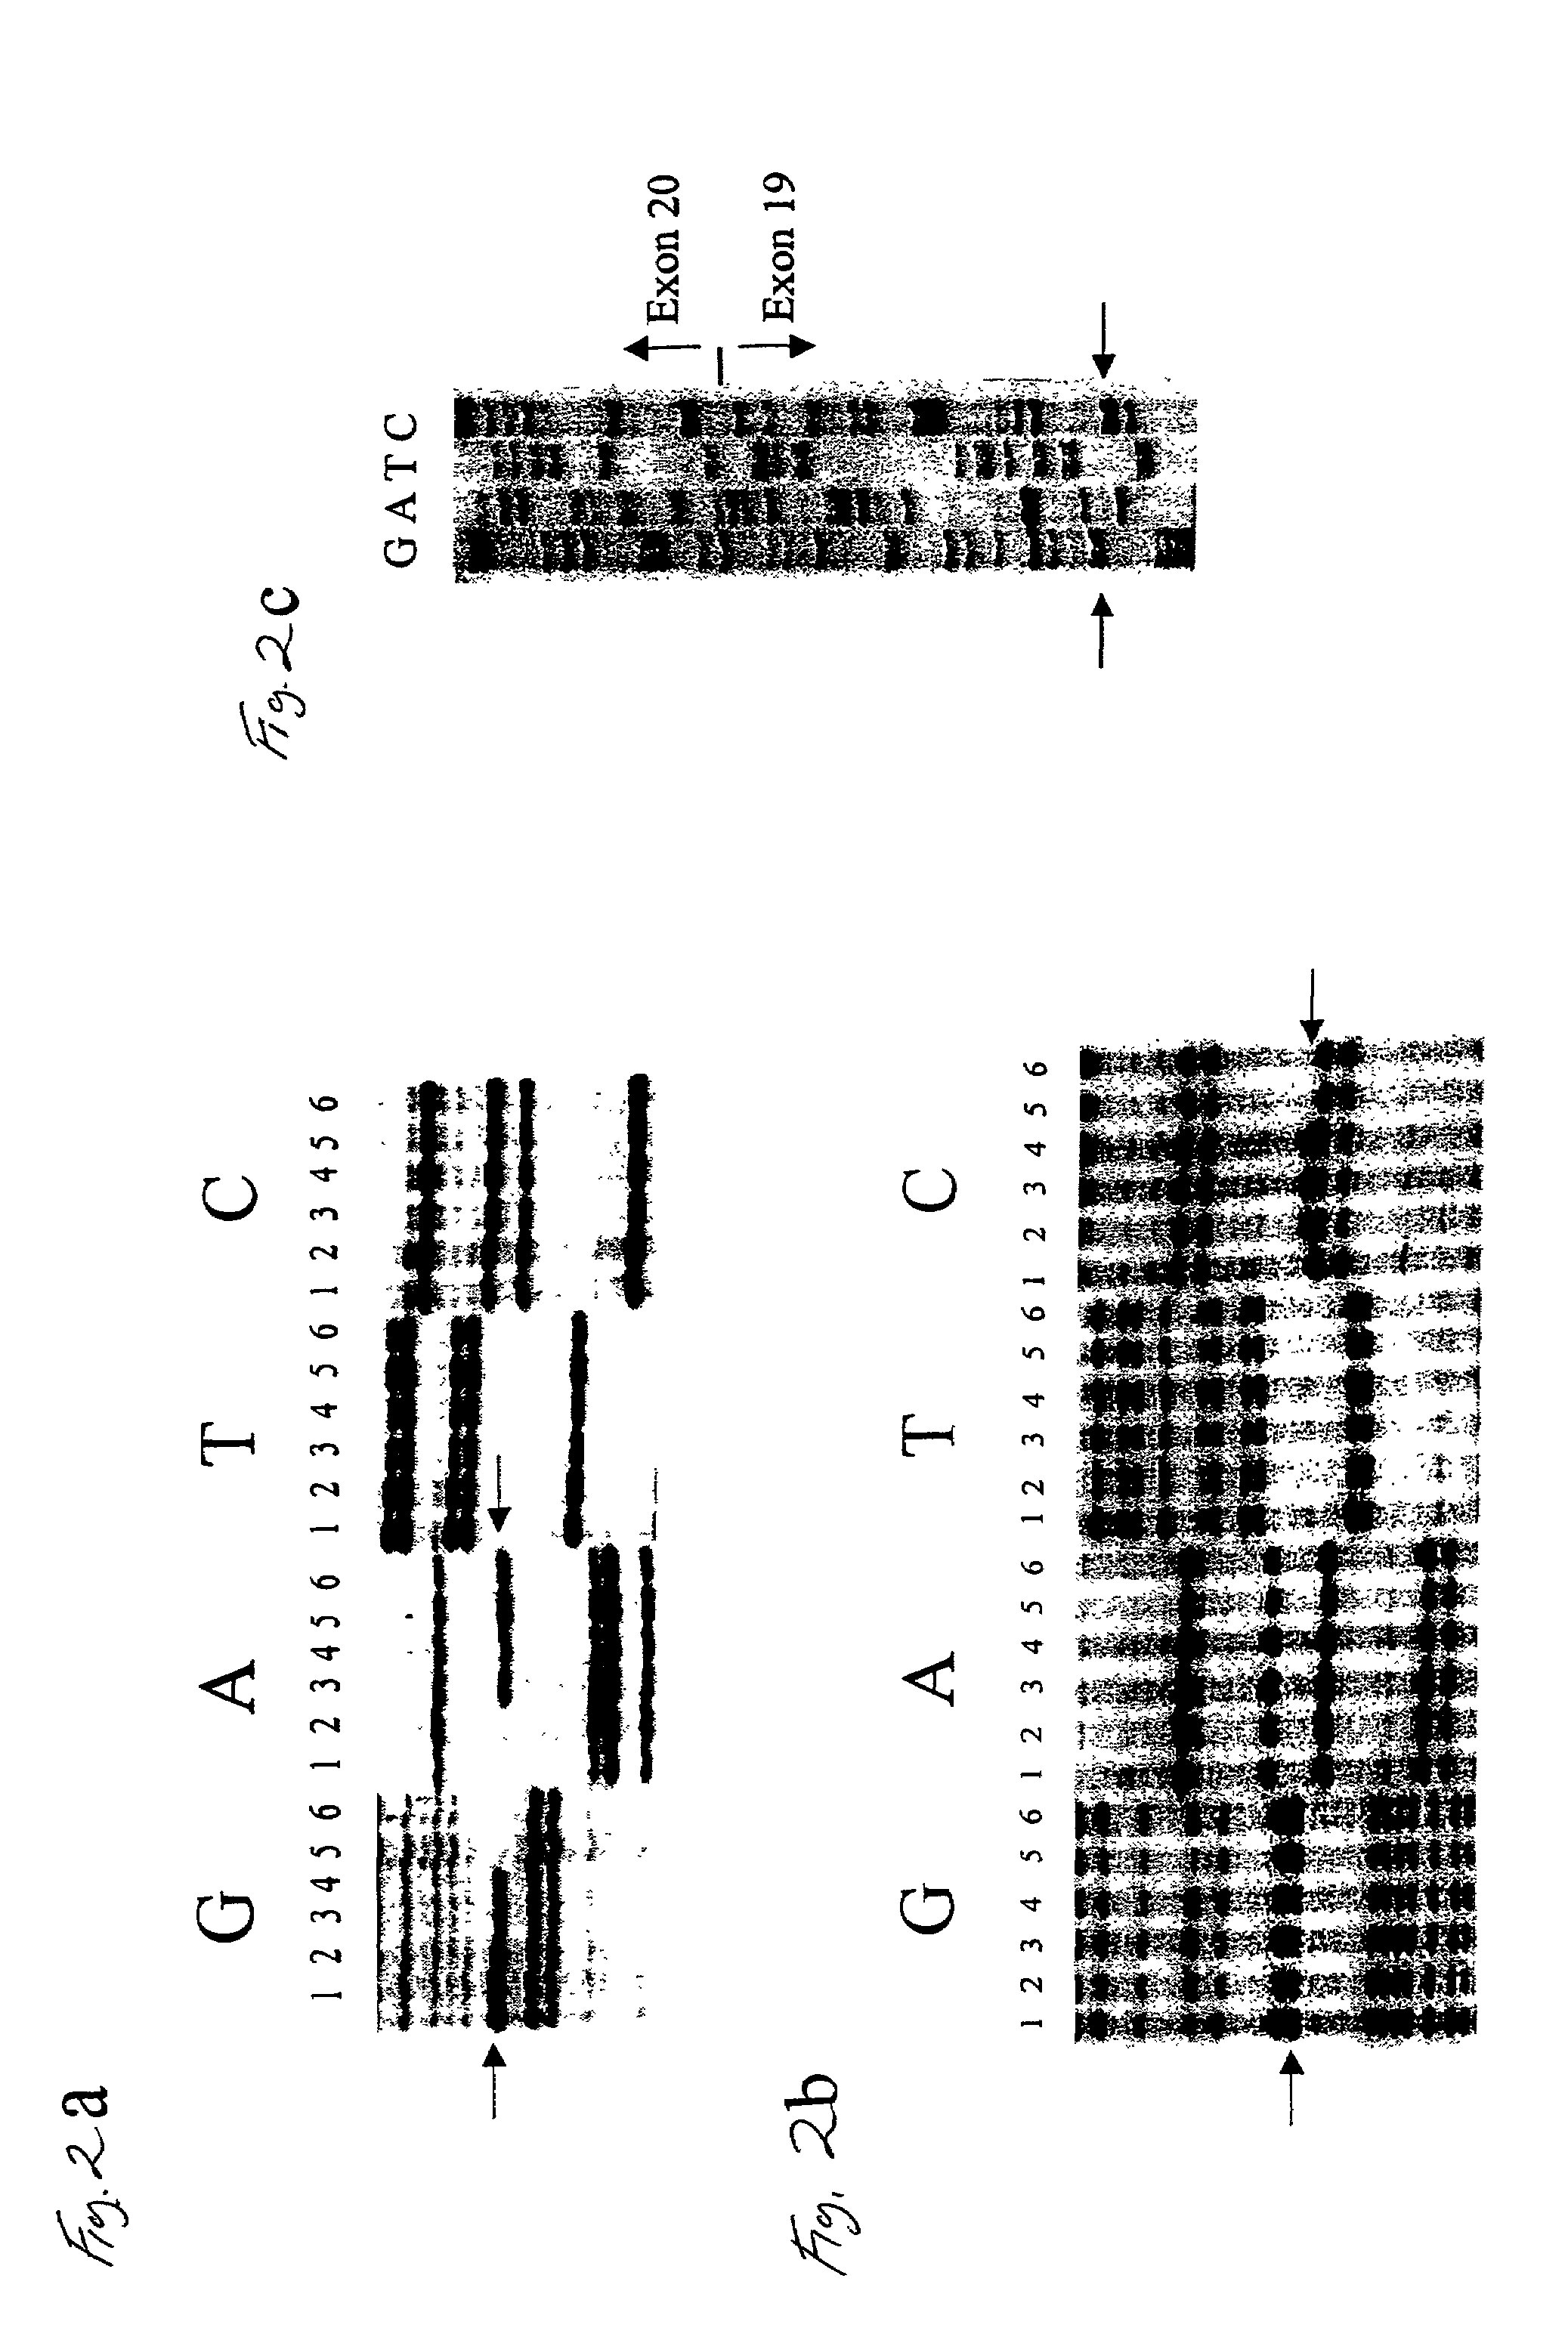 Gene for identifying individuals with familial dysautonomia